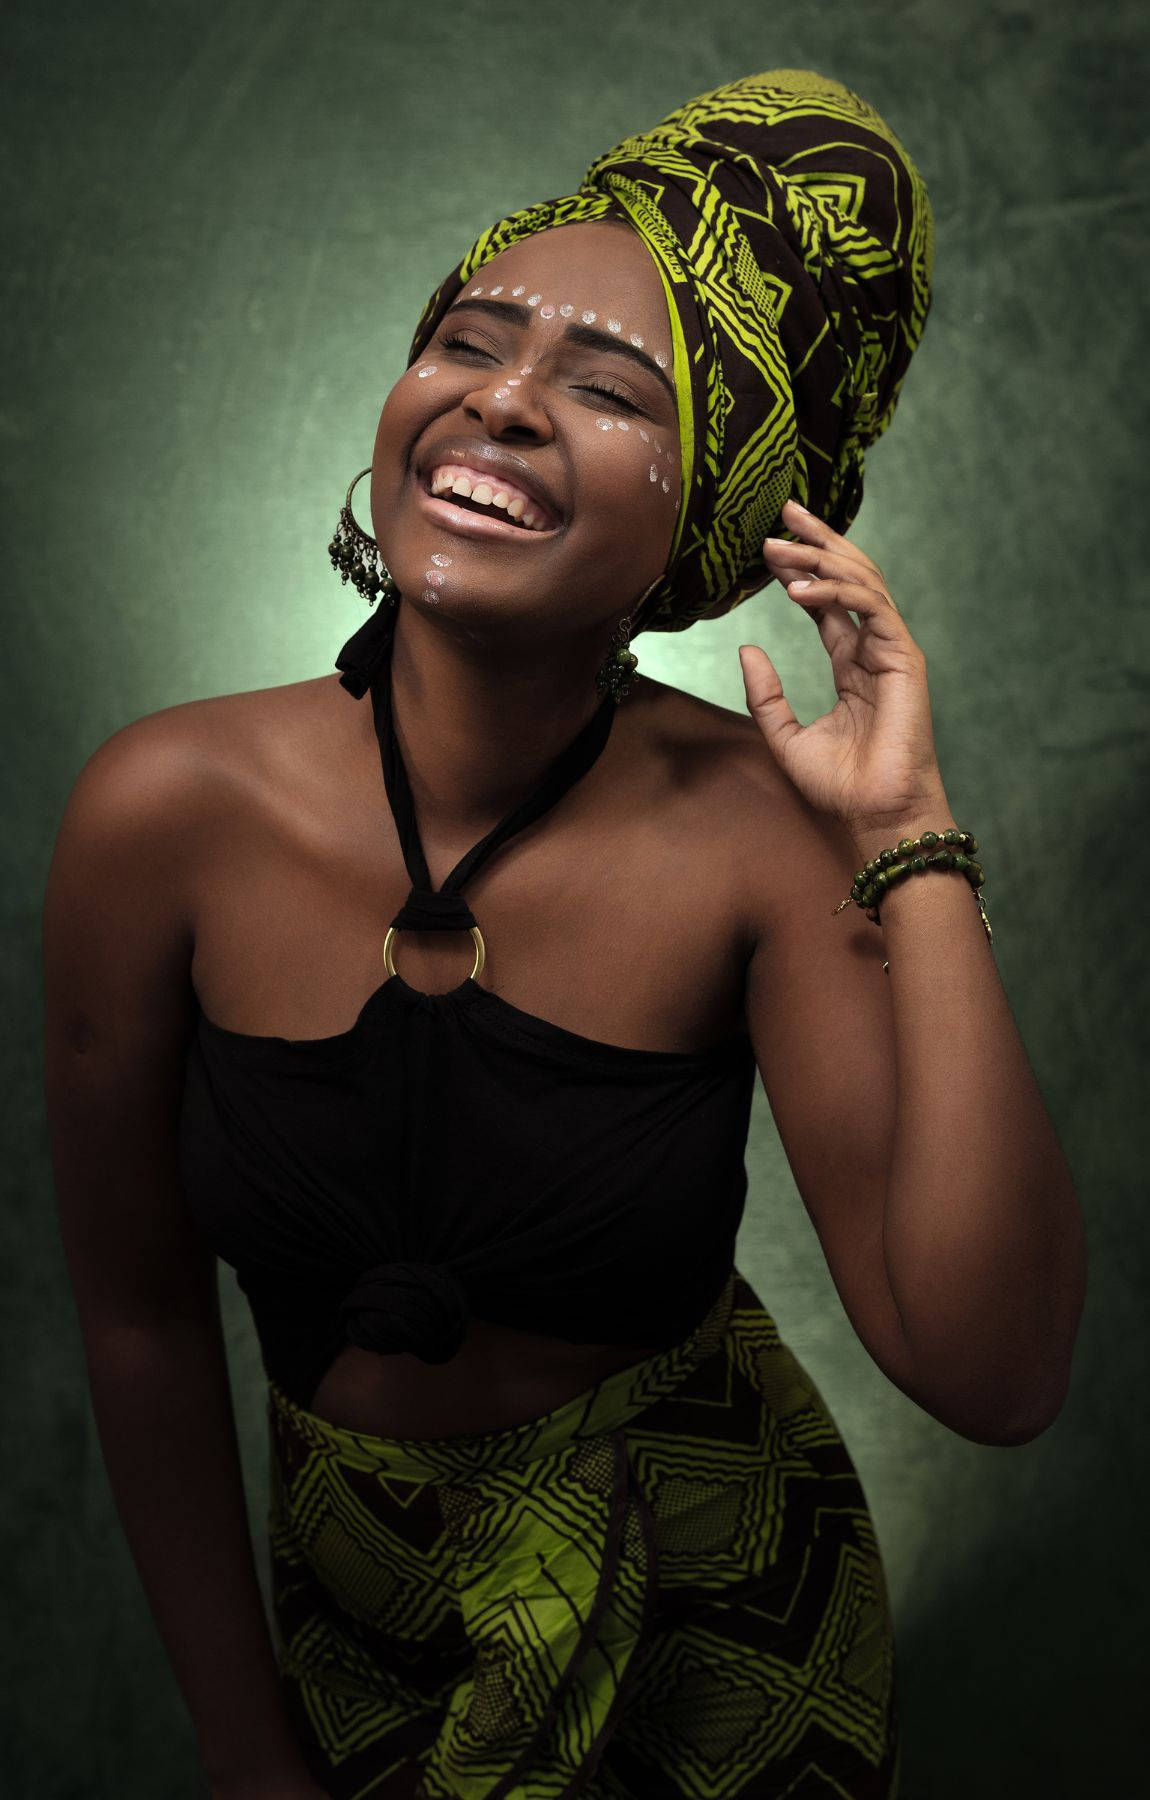 African Woman Cheerful Smile Wallpaper